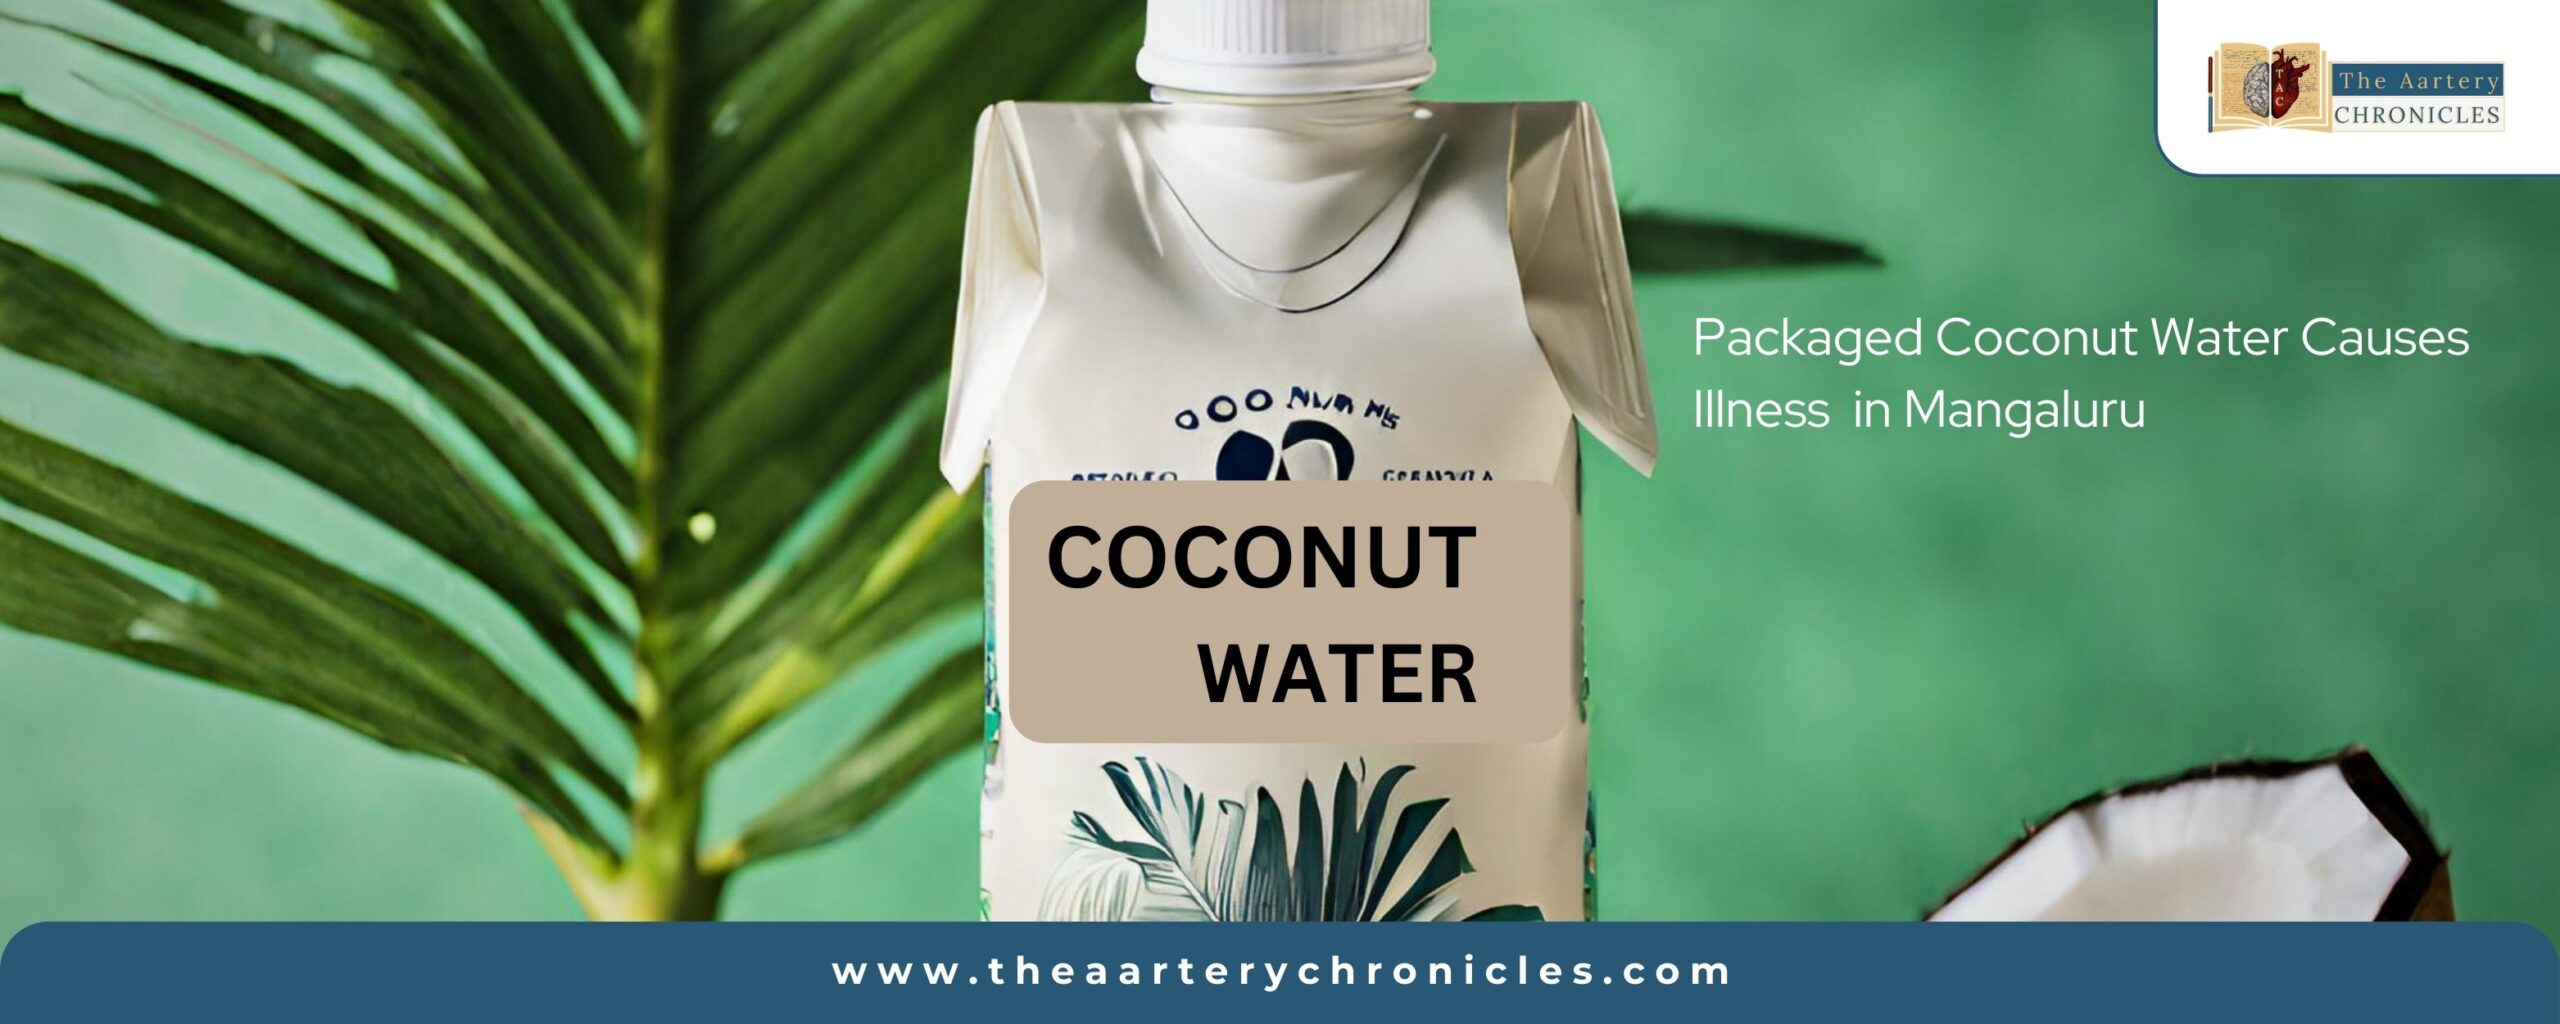 packaged-coconut-water-the-aaartery-chronicles-tac